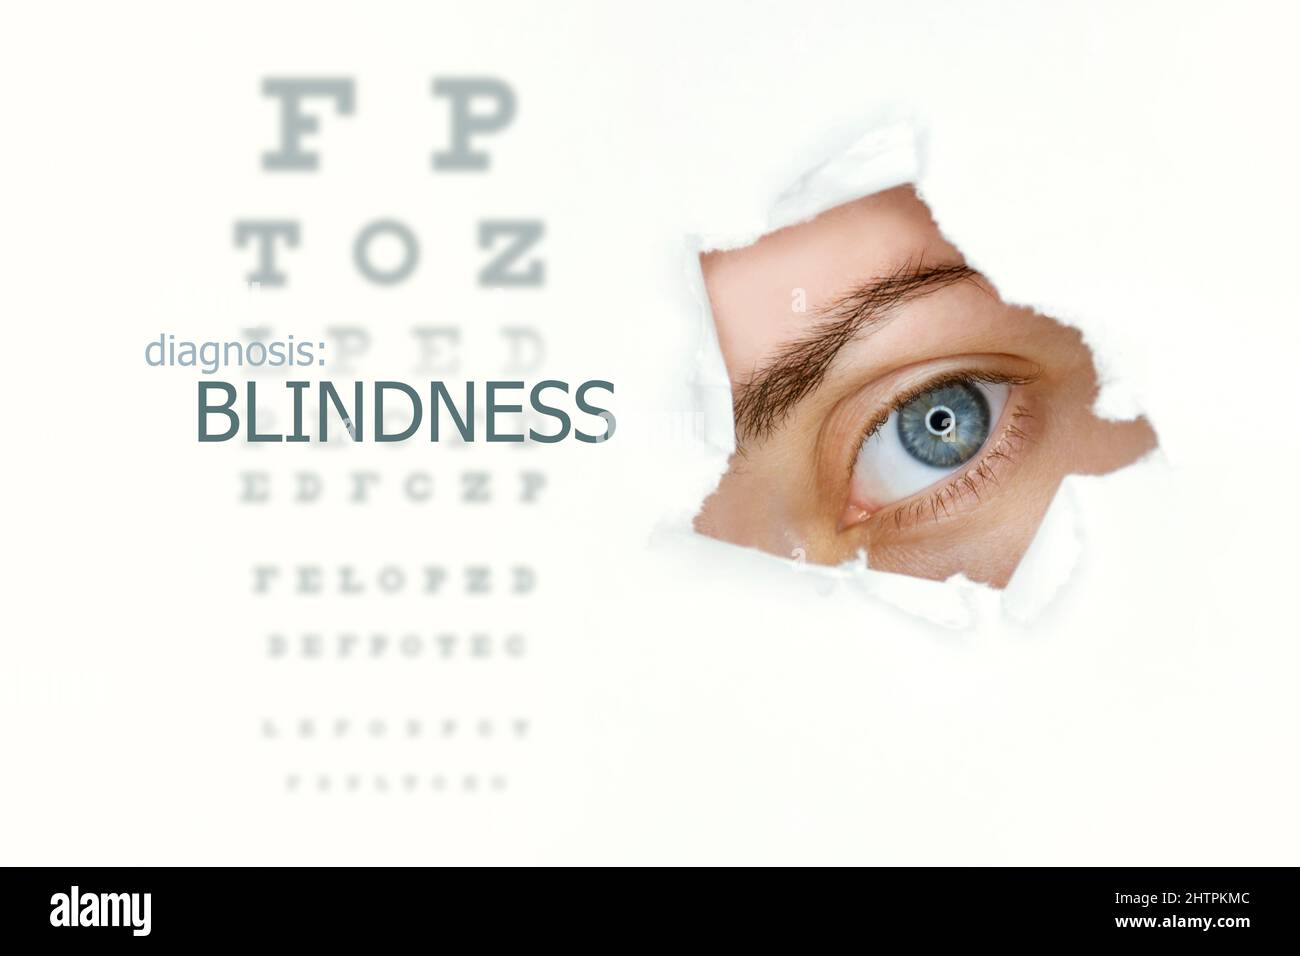 Blindness disease poster wwith eye test chart and blue eye on right. Isolated on white Stock Photo